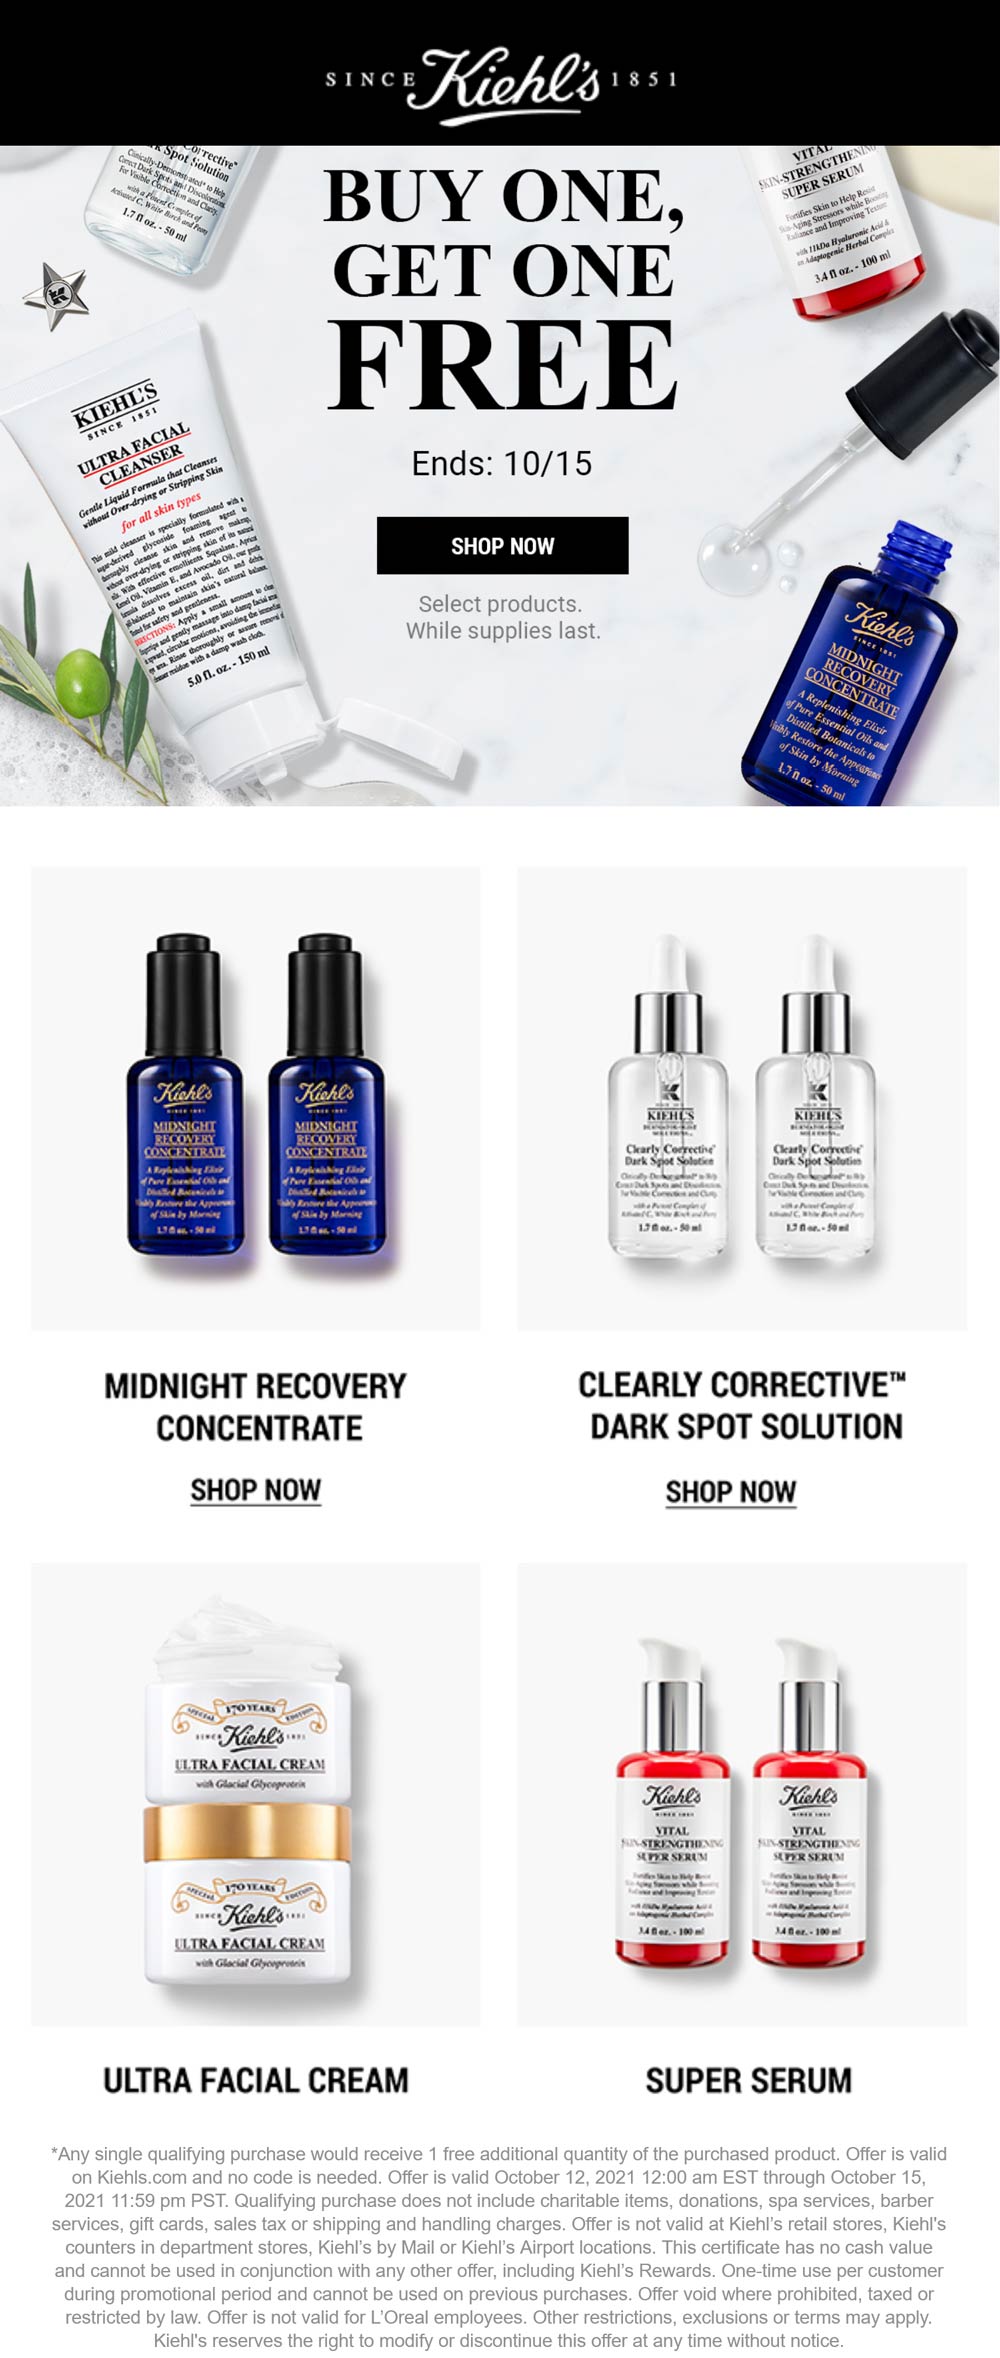 Kiehls stores Coupon  Second bestseller free online today at Kiehls cosmetics #kiehls 